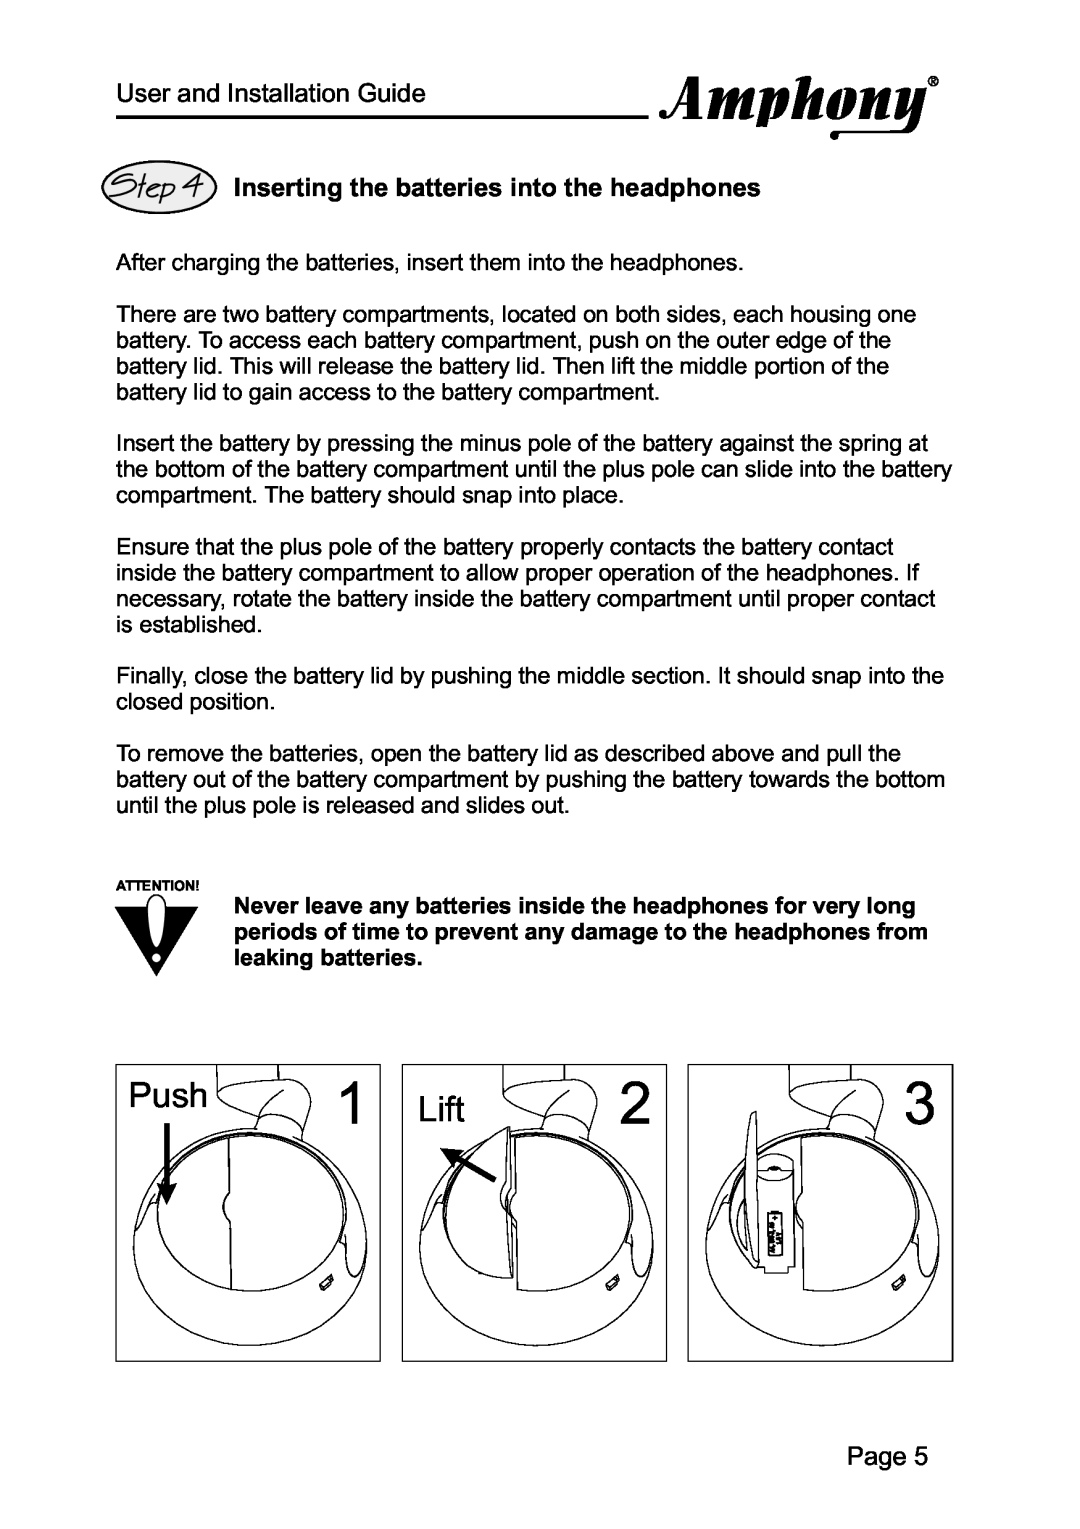 Amphony 2000 manual Inserting the batteries into the headphones, Push, Lift, User and Installation Guide, Page 